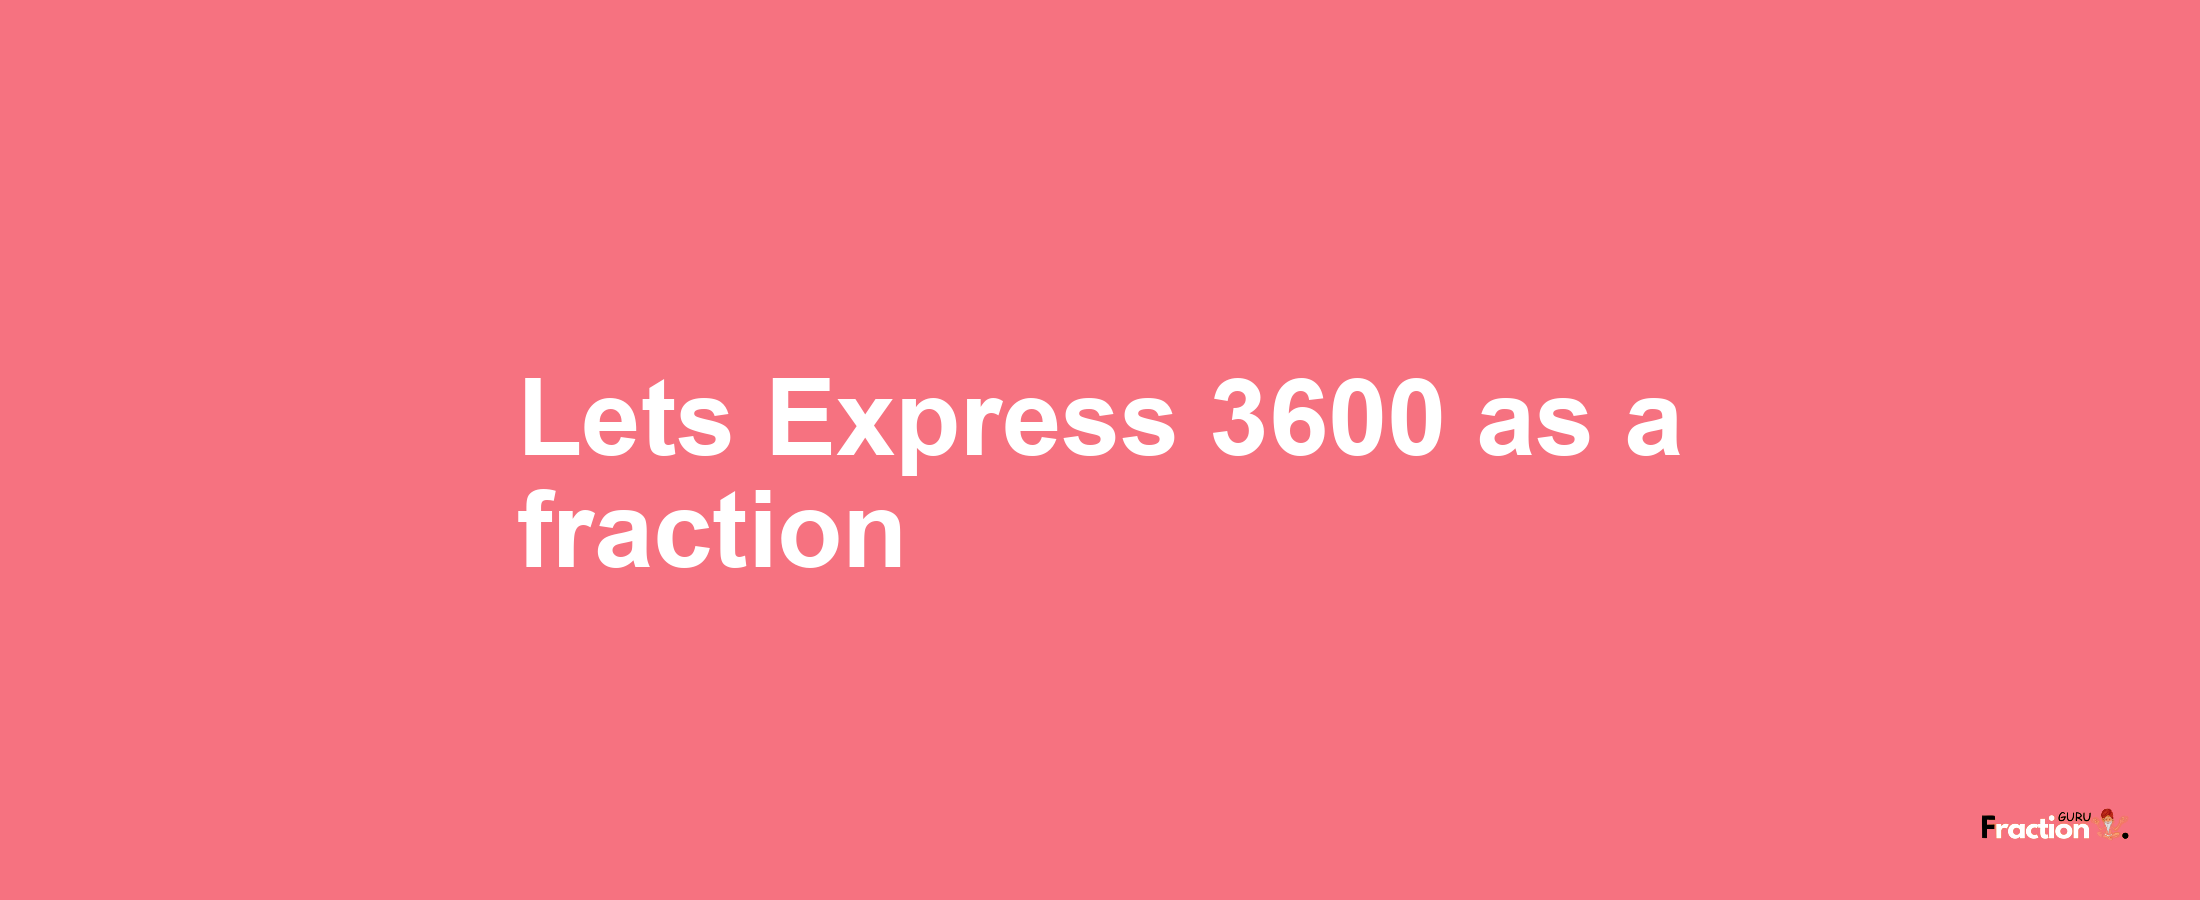 Lets Express 3600 as afraction